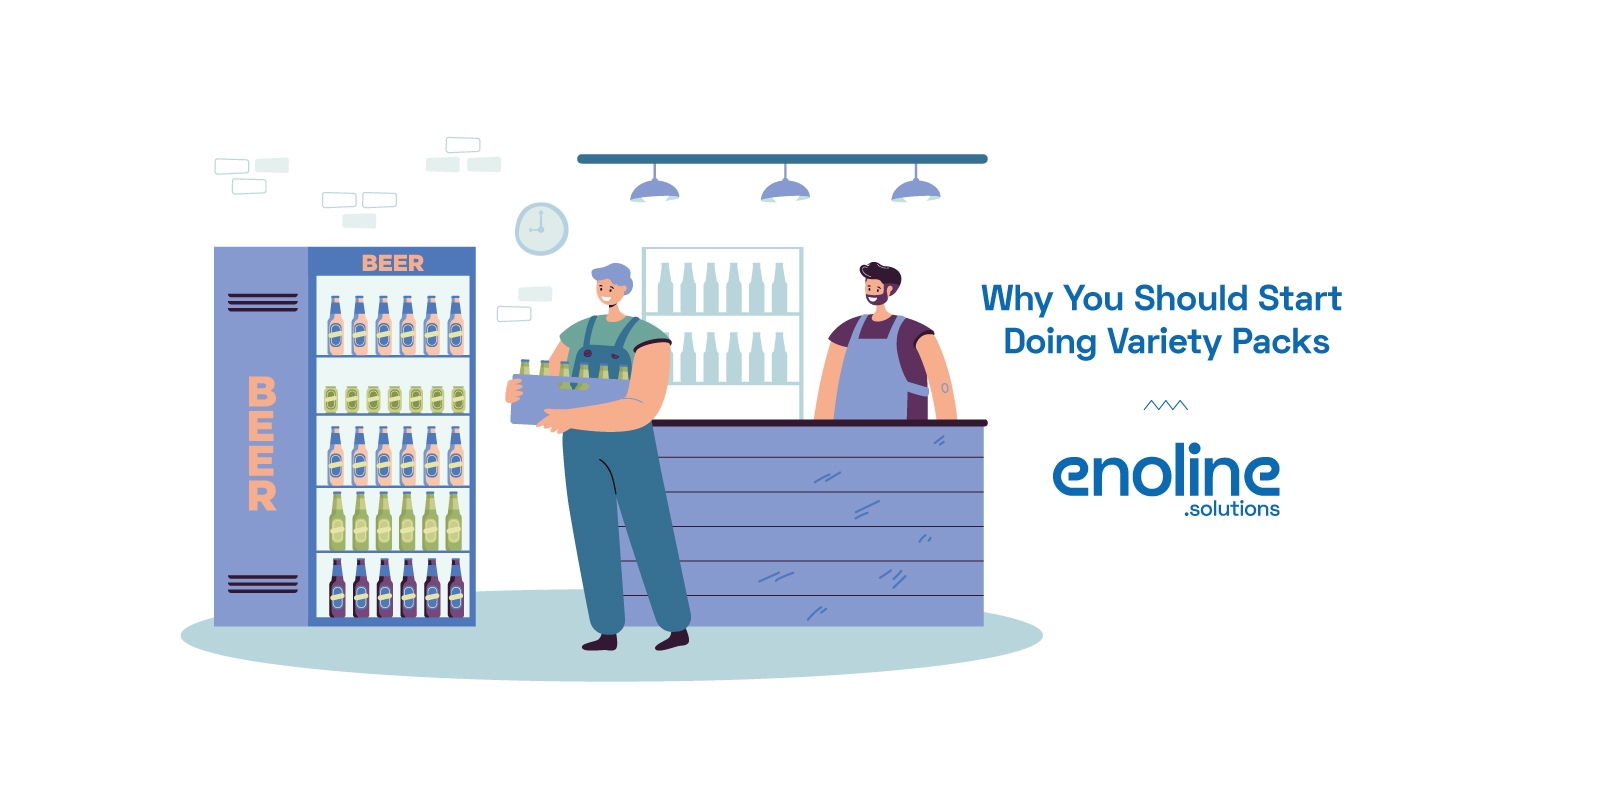 Enoline why you should start doing variety packs